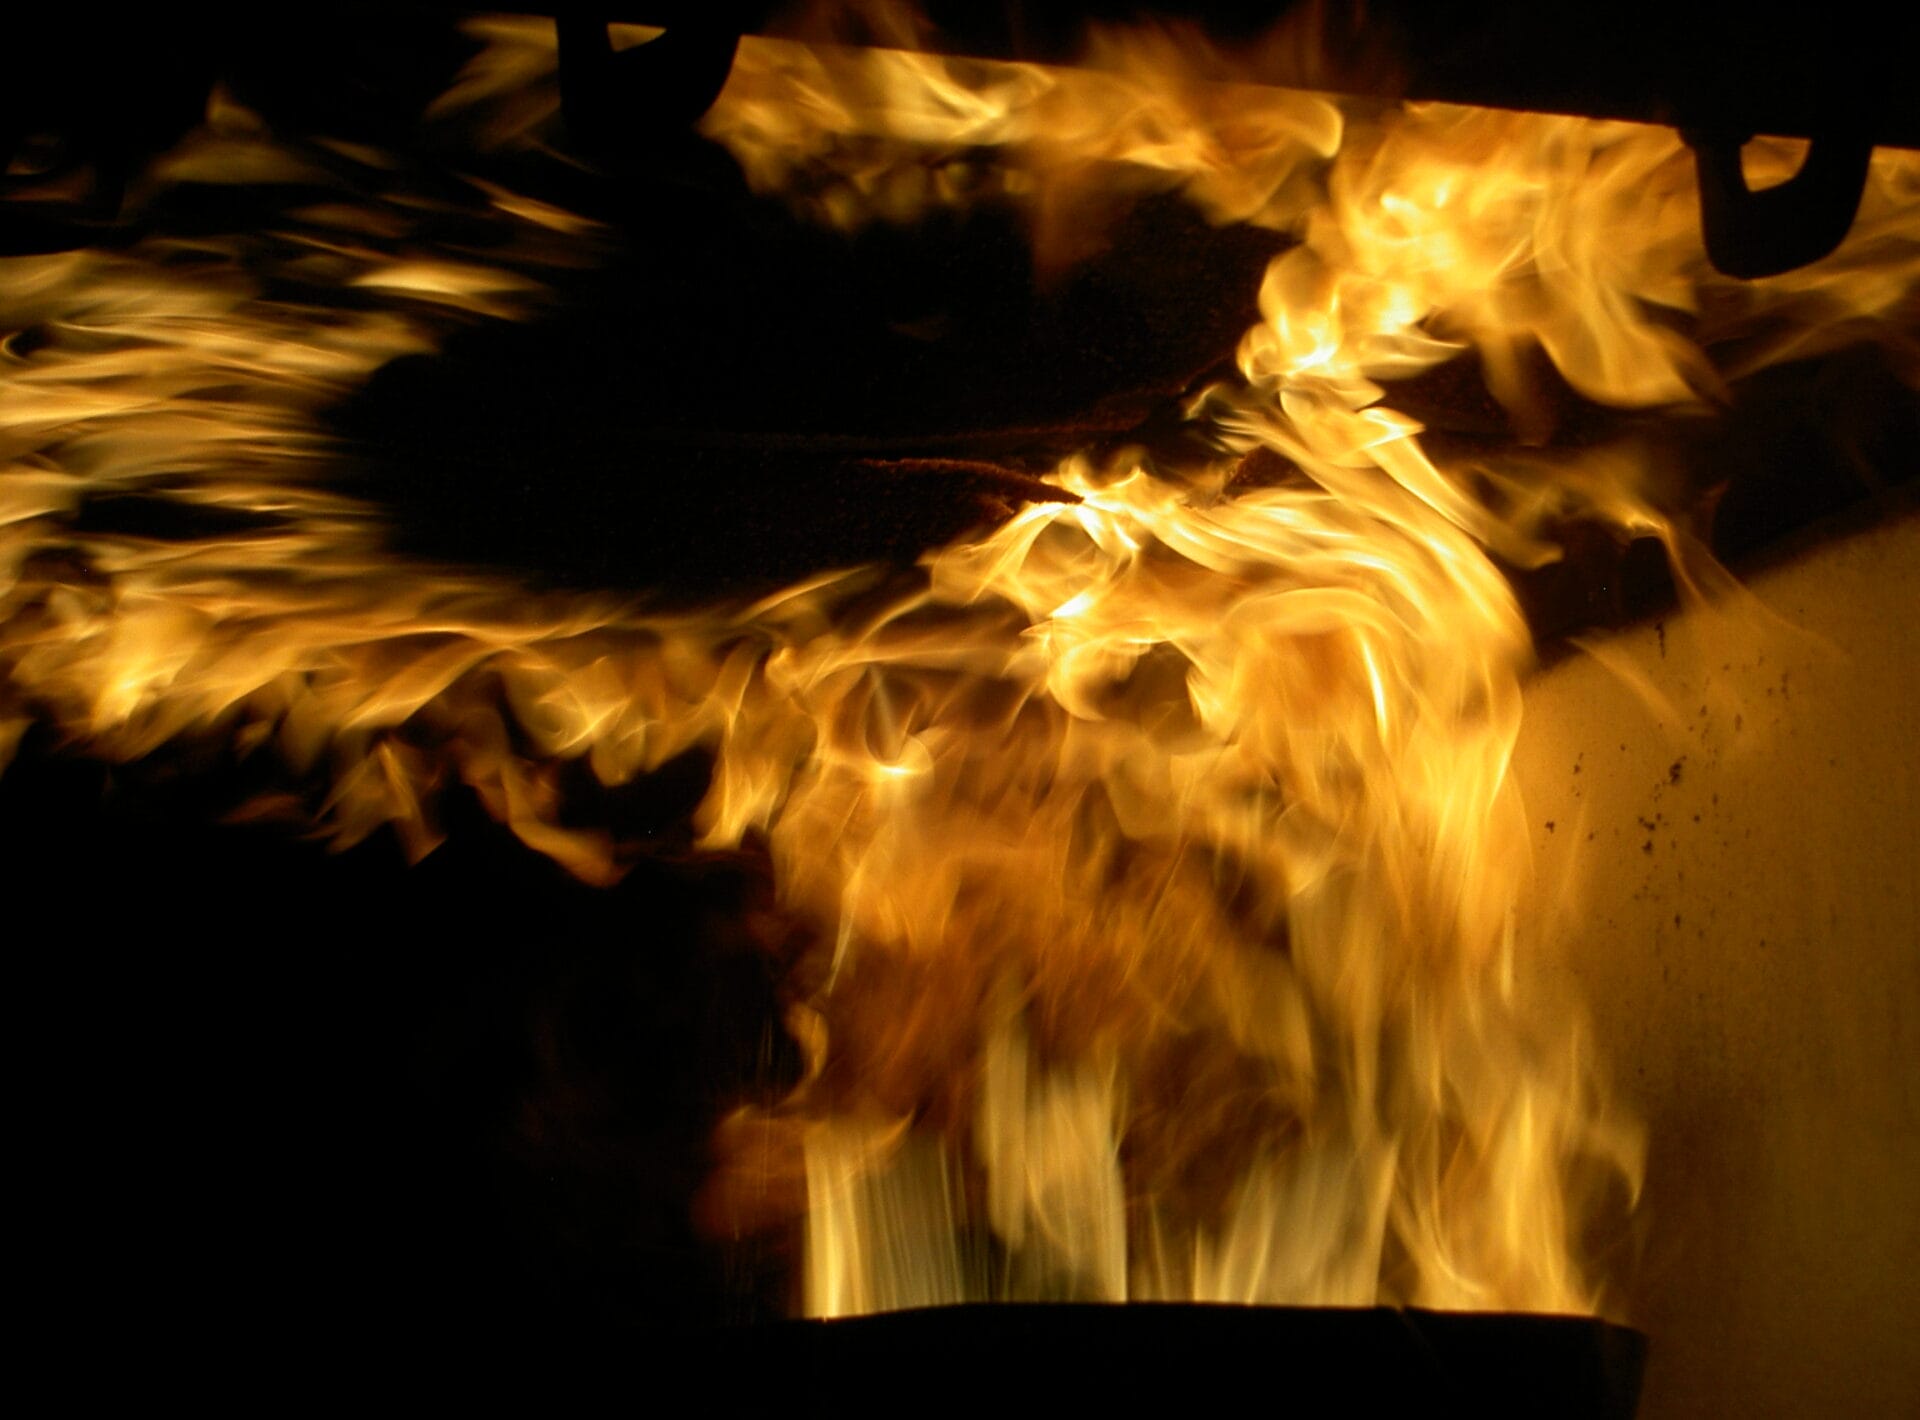 Aircraft component being blasted with fire in flammability testing lab